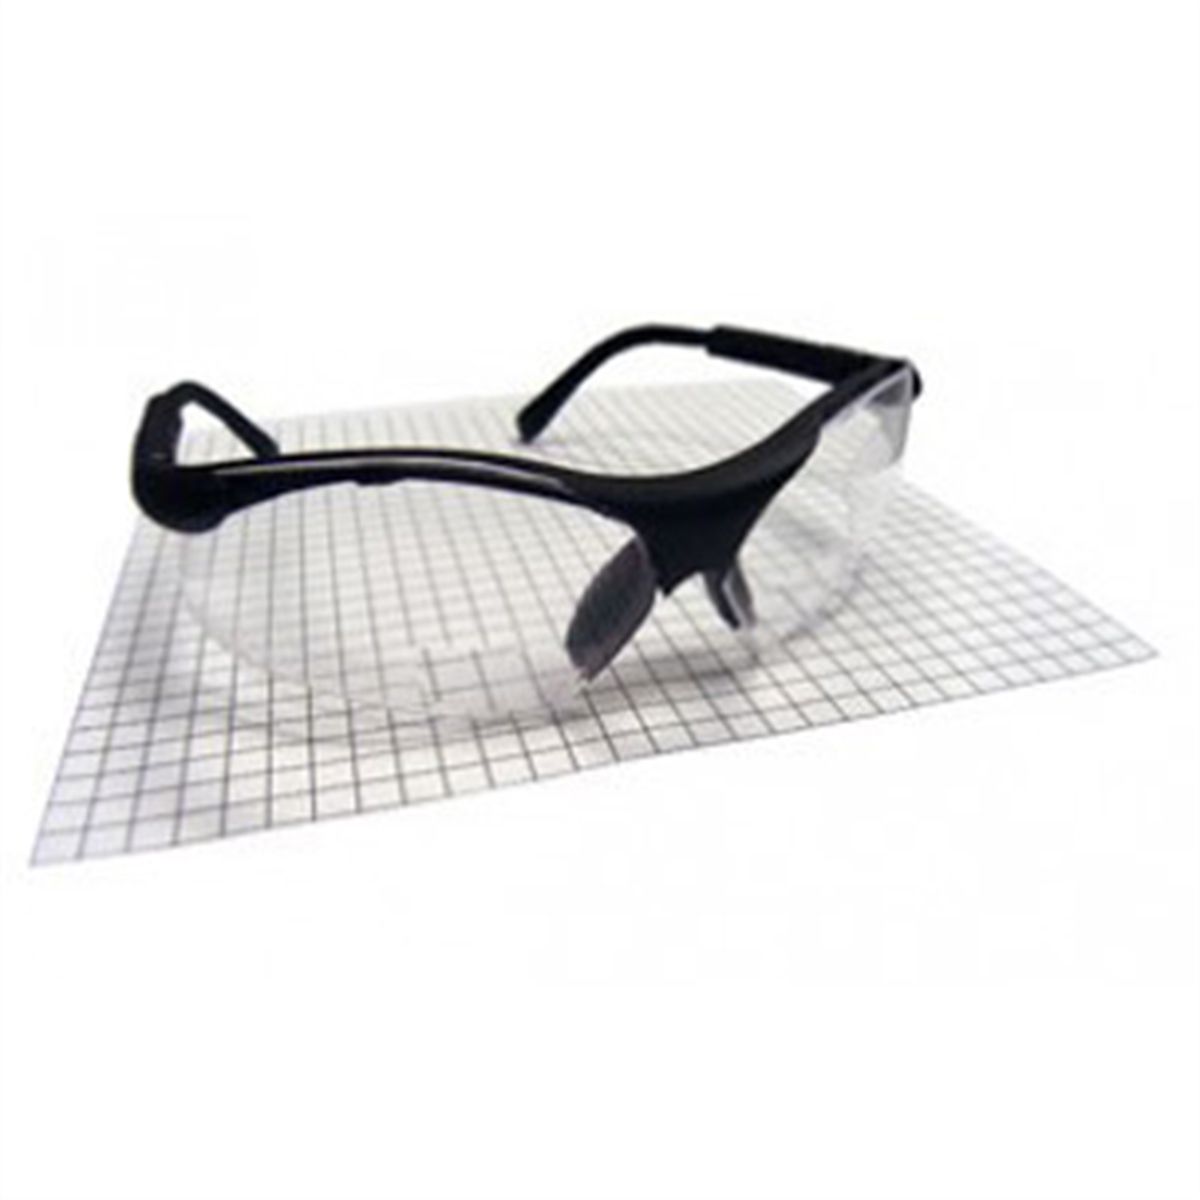 Sidewinders Readers Safety Glasses - +2.00x Strength